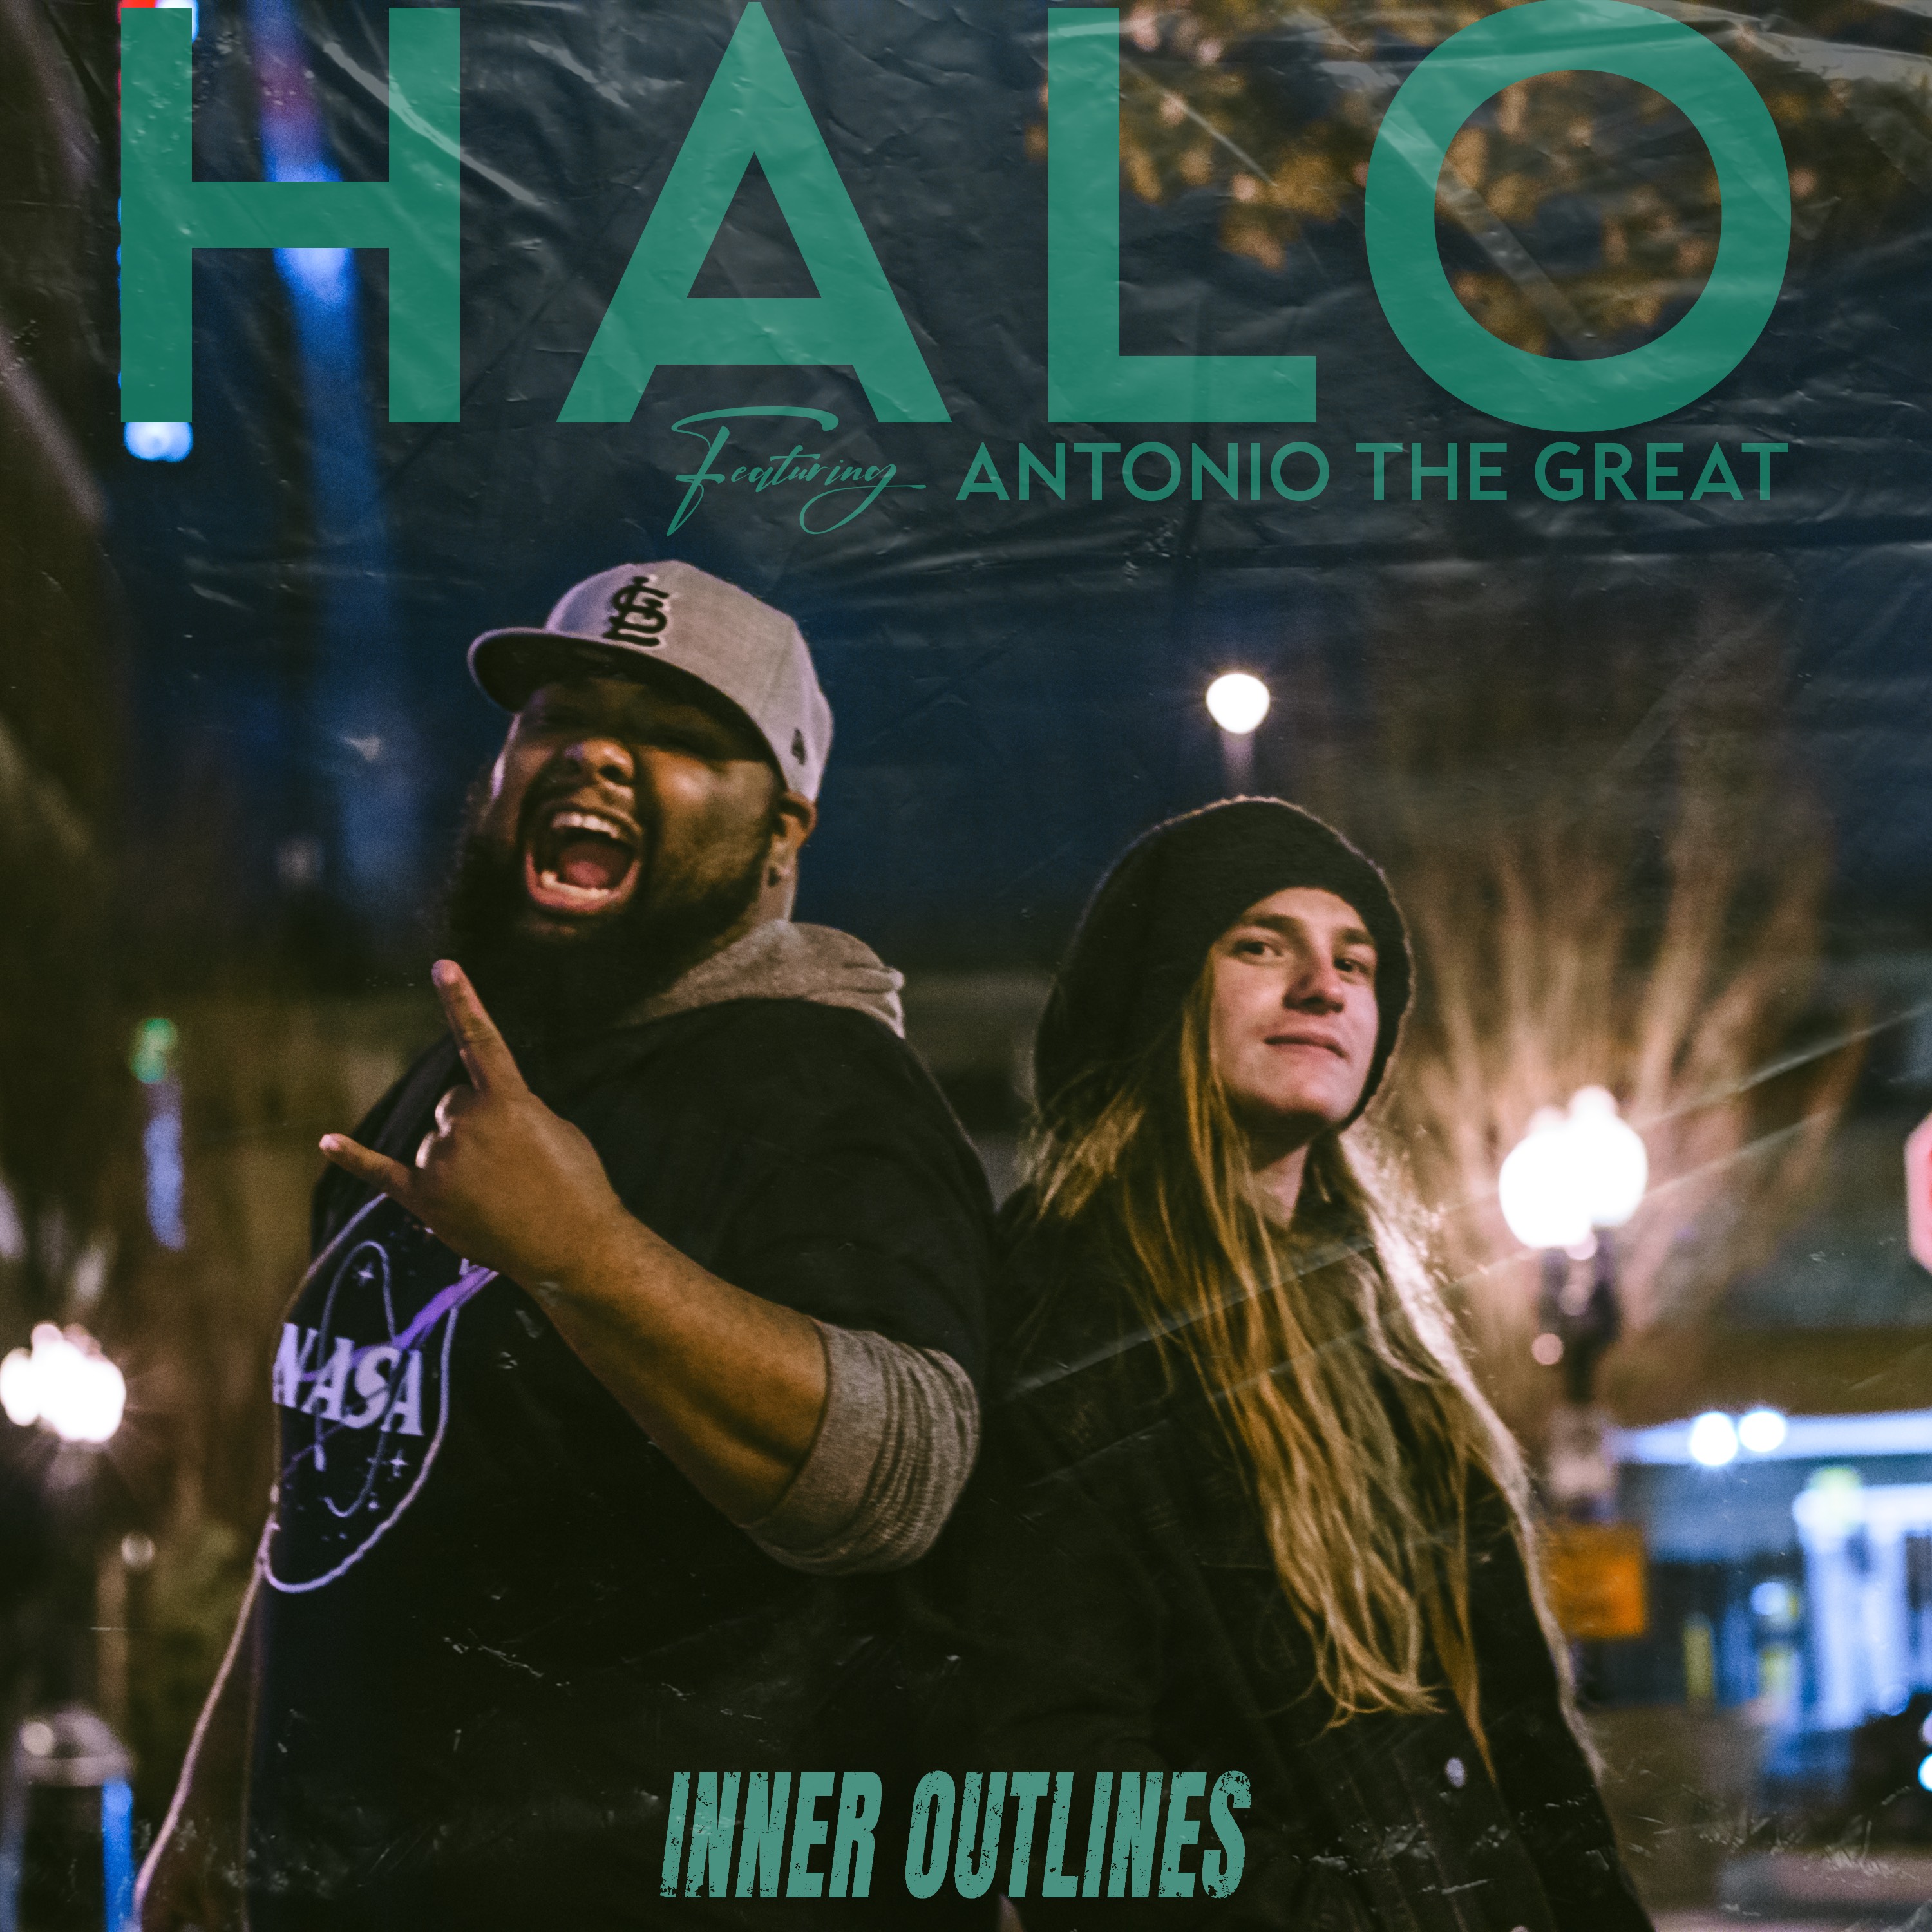 Art for Inner Outlines-Halo-Featuring Antonio The Great-Single-Rock-2022-Produced & Mixed by Kevin W. Gates-Mastered by Troy Glessner at S.P.E.C.T.R.E. MASTERING by Inner Outlines